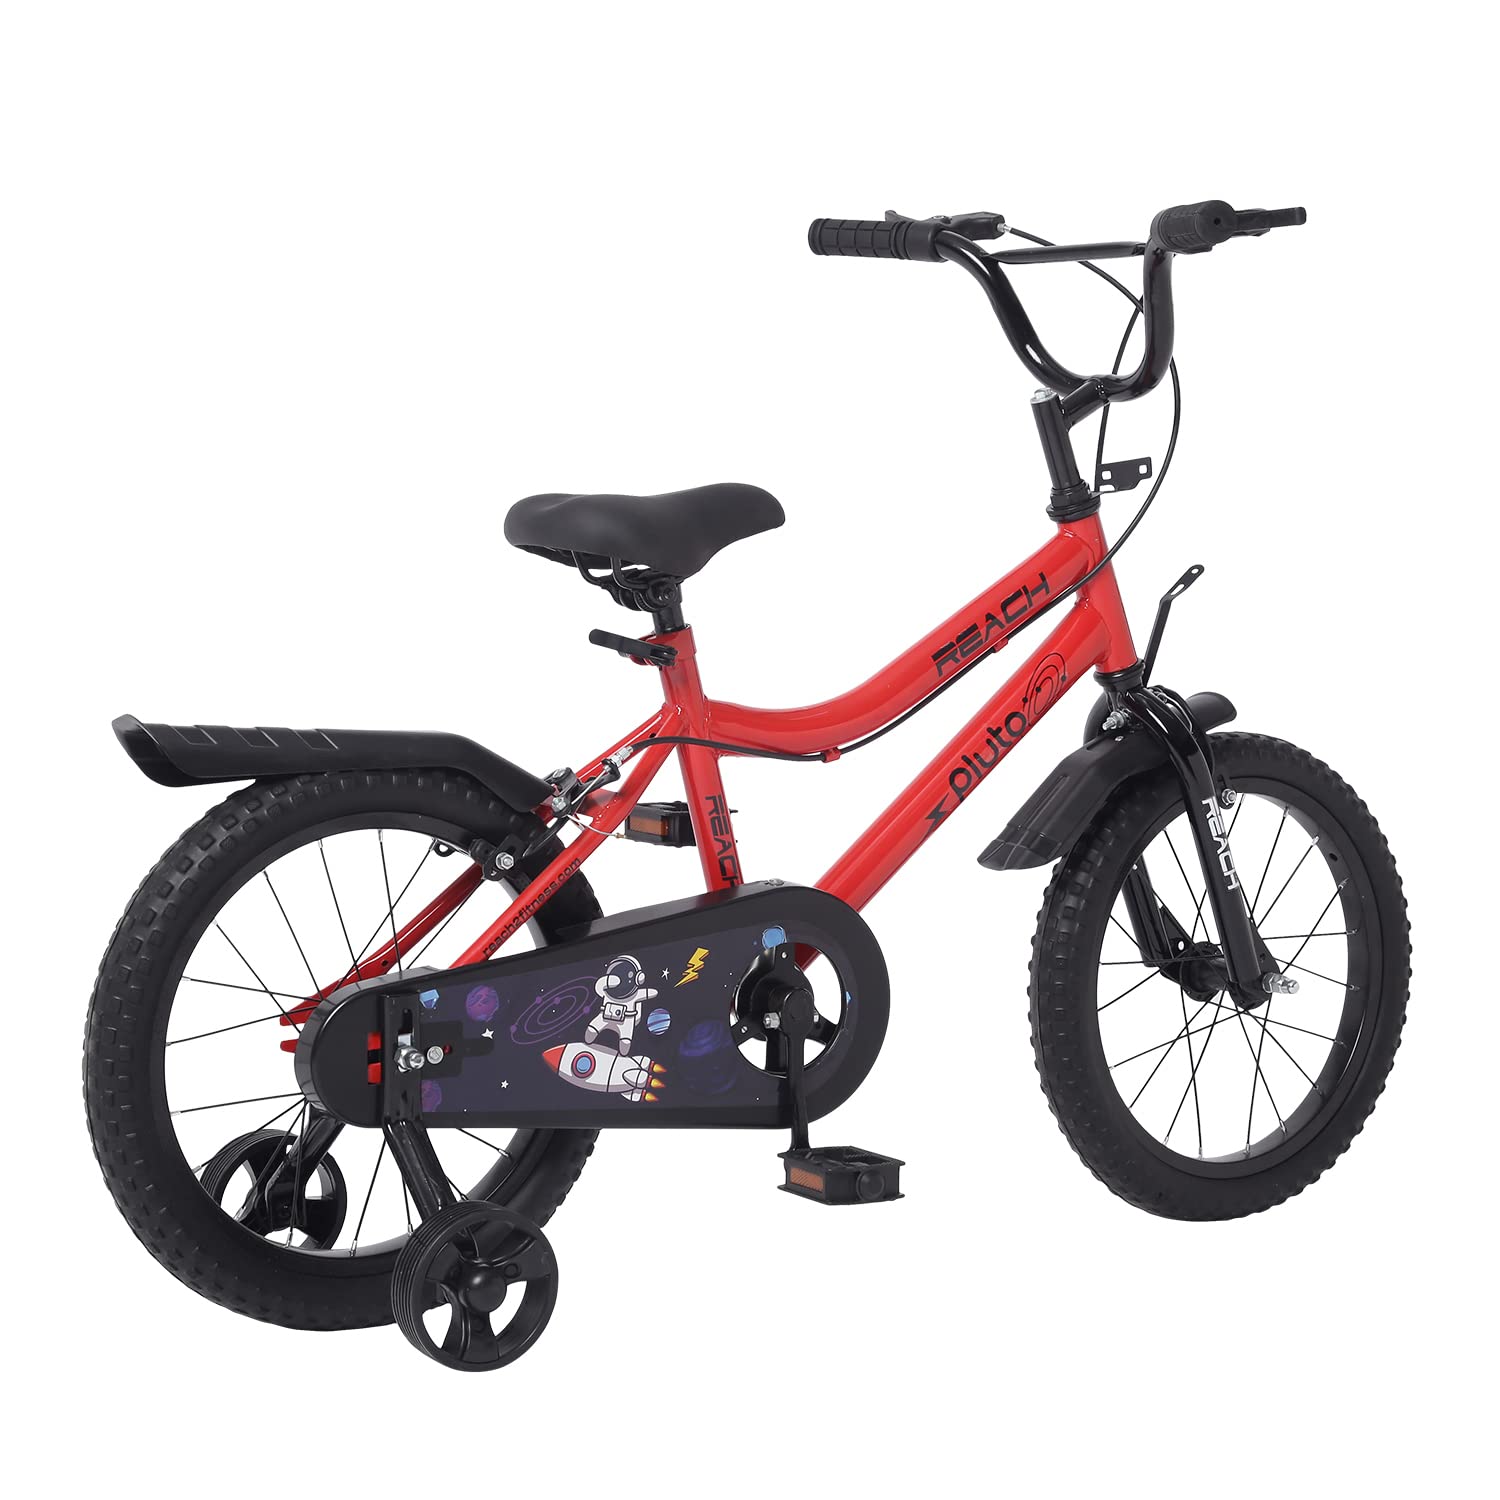 Reach Pluto Kids Cycle 16T with Training Wheels | for Boys and Girls | 90% Assembled | Frame Size: 12" | Ideal for Height: 3 ft 8 inch+ | Ideal for Ages 4-8 Years